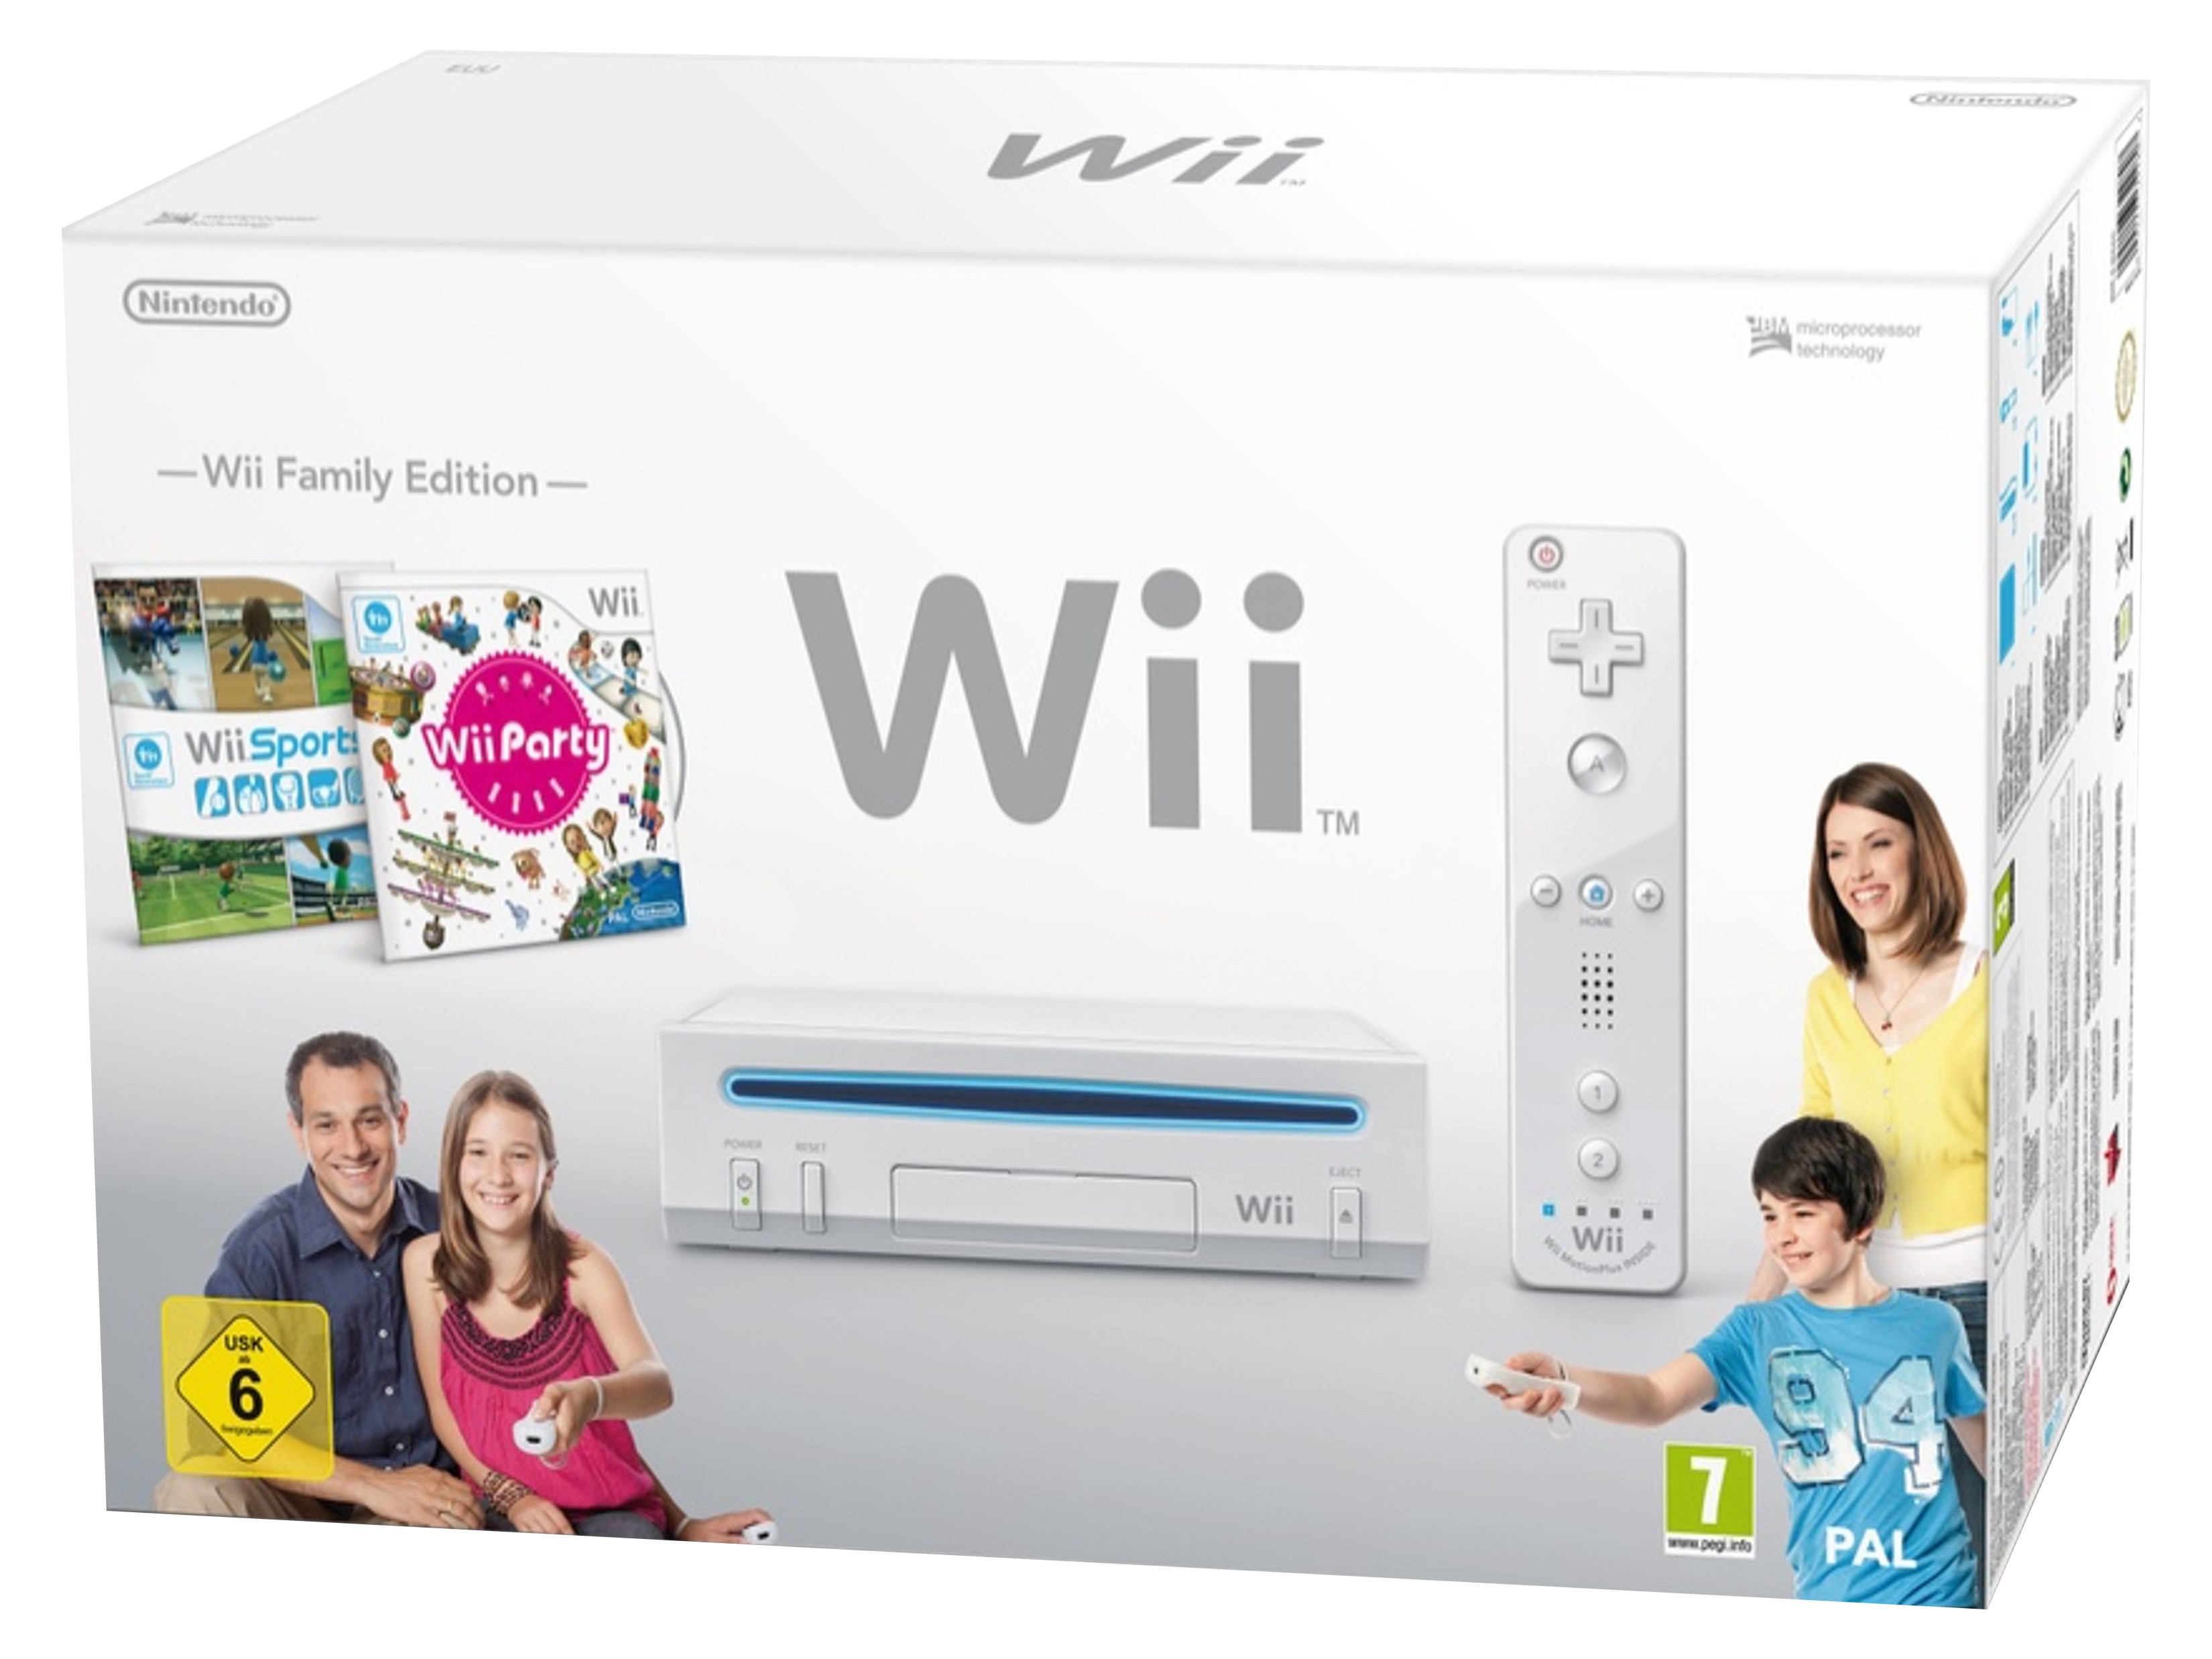 Nintendo Wii Starter Pack - Wii Family Edition [Complete] - Wii Hardware